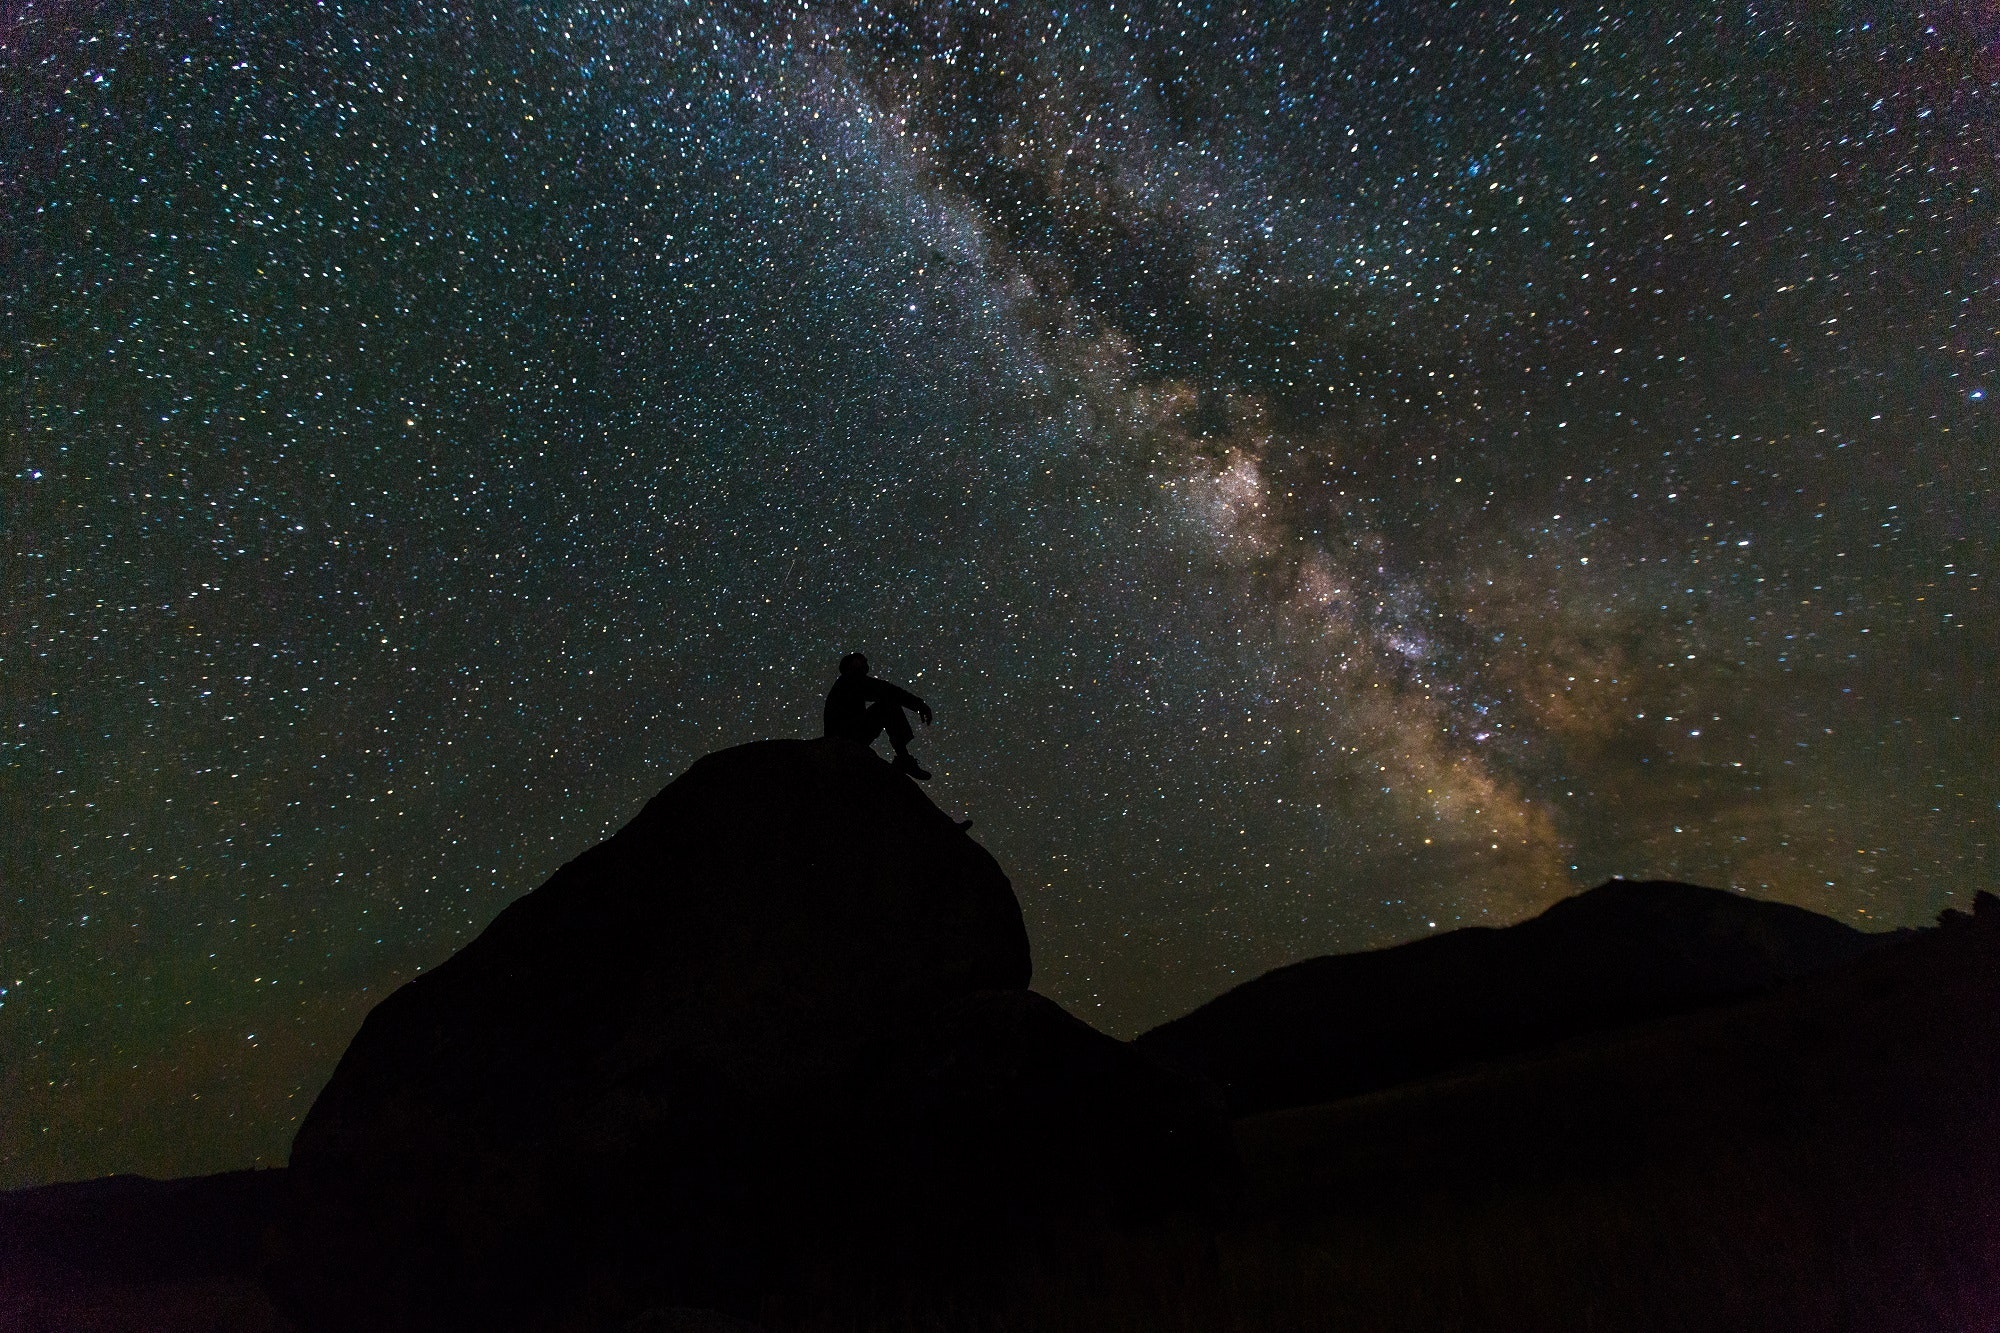 A silhouette of a person sits on a rock, gazing up at an incredible number of stars in an inky black sky.